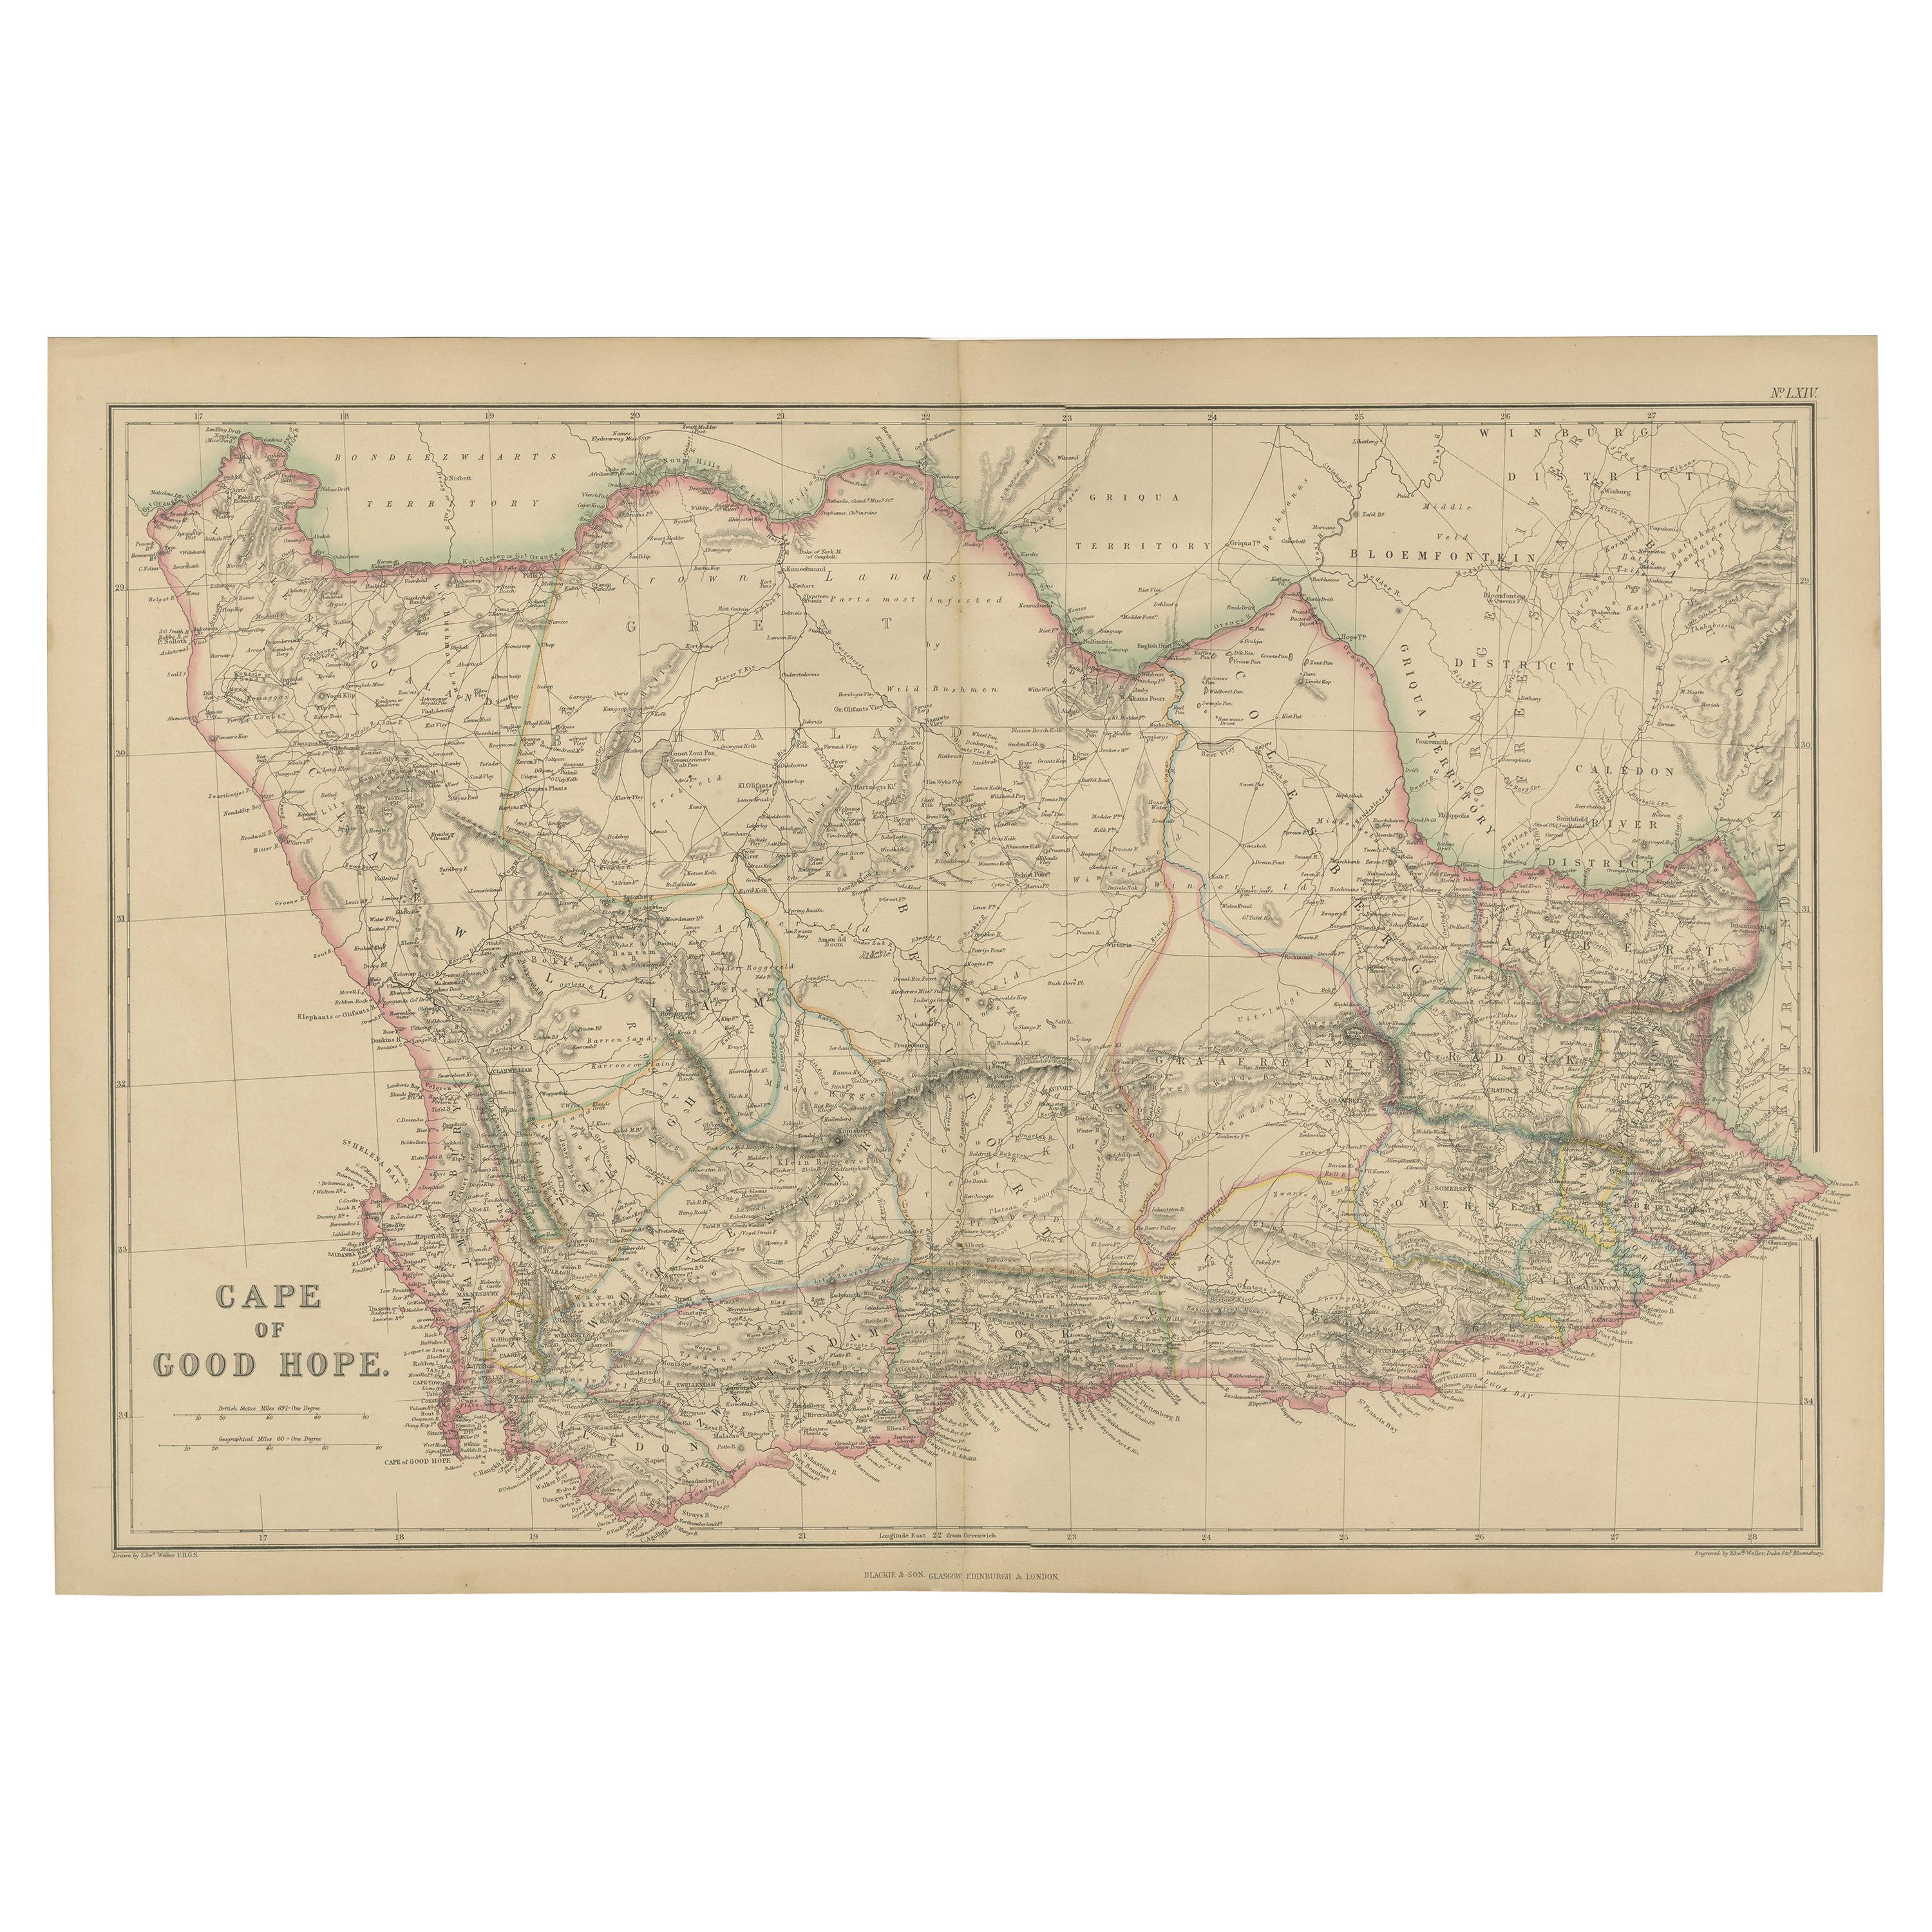 Antique Map of the Cape of Good Hope by W. G. Blackie, 1859